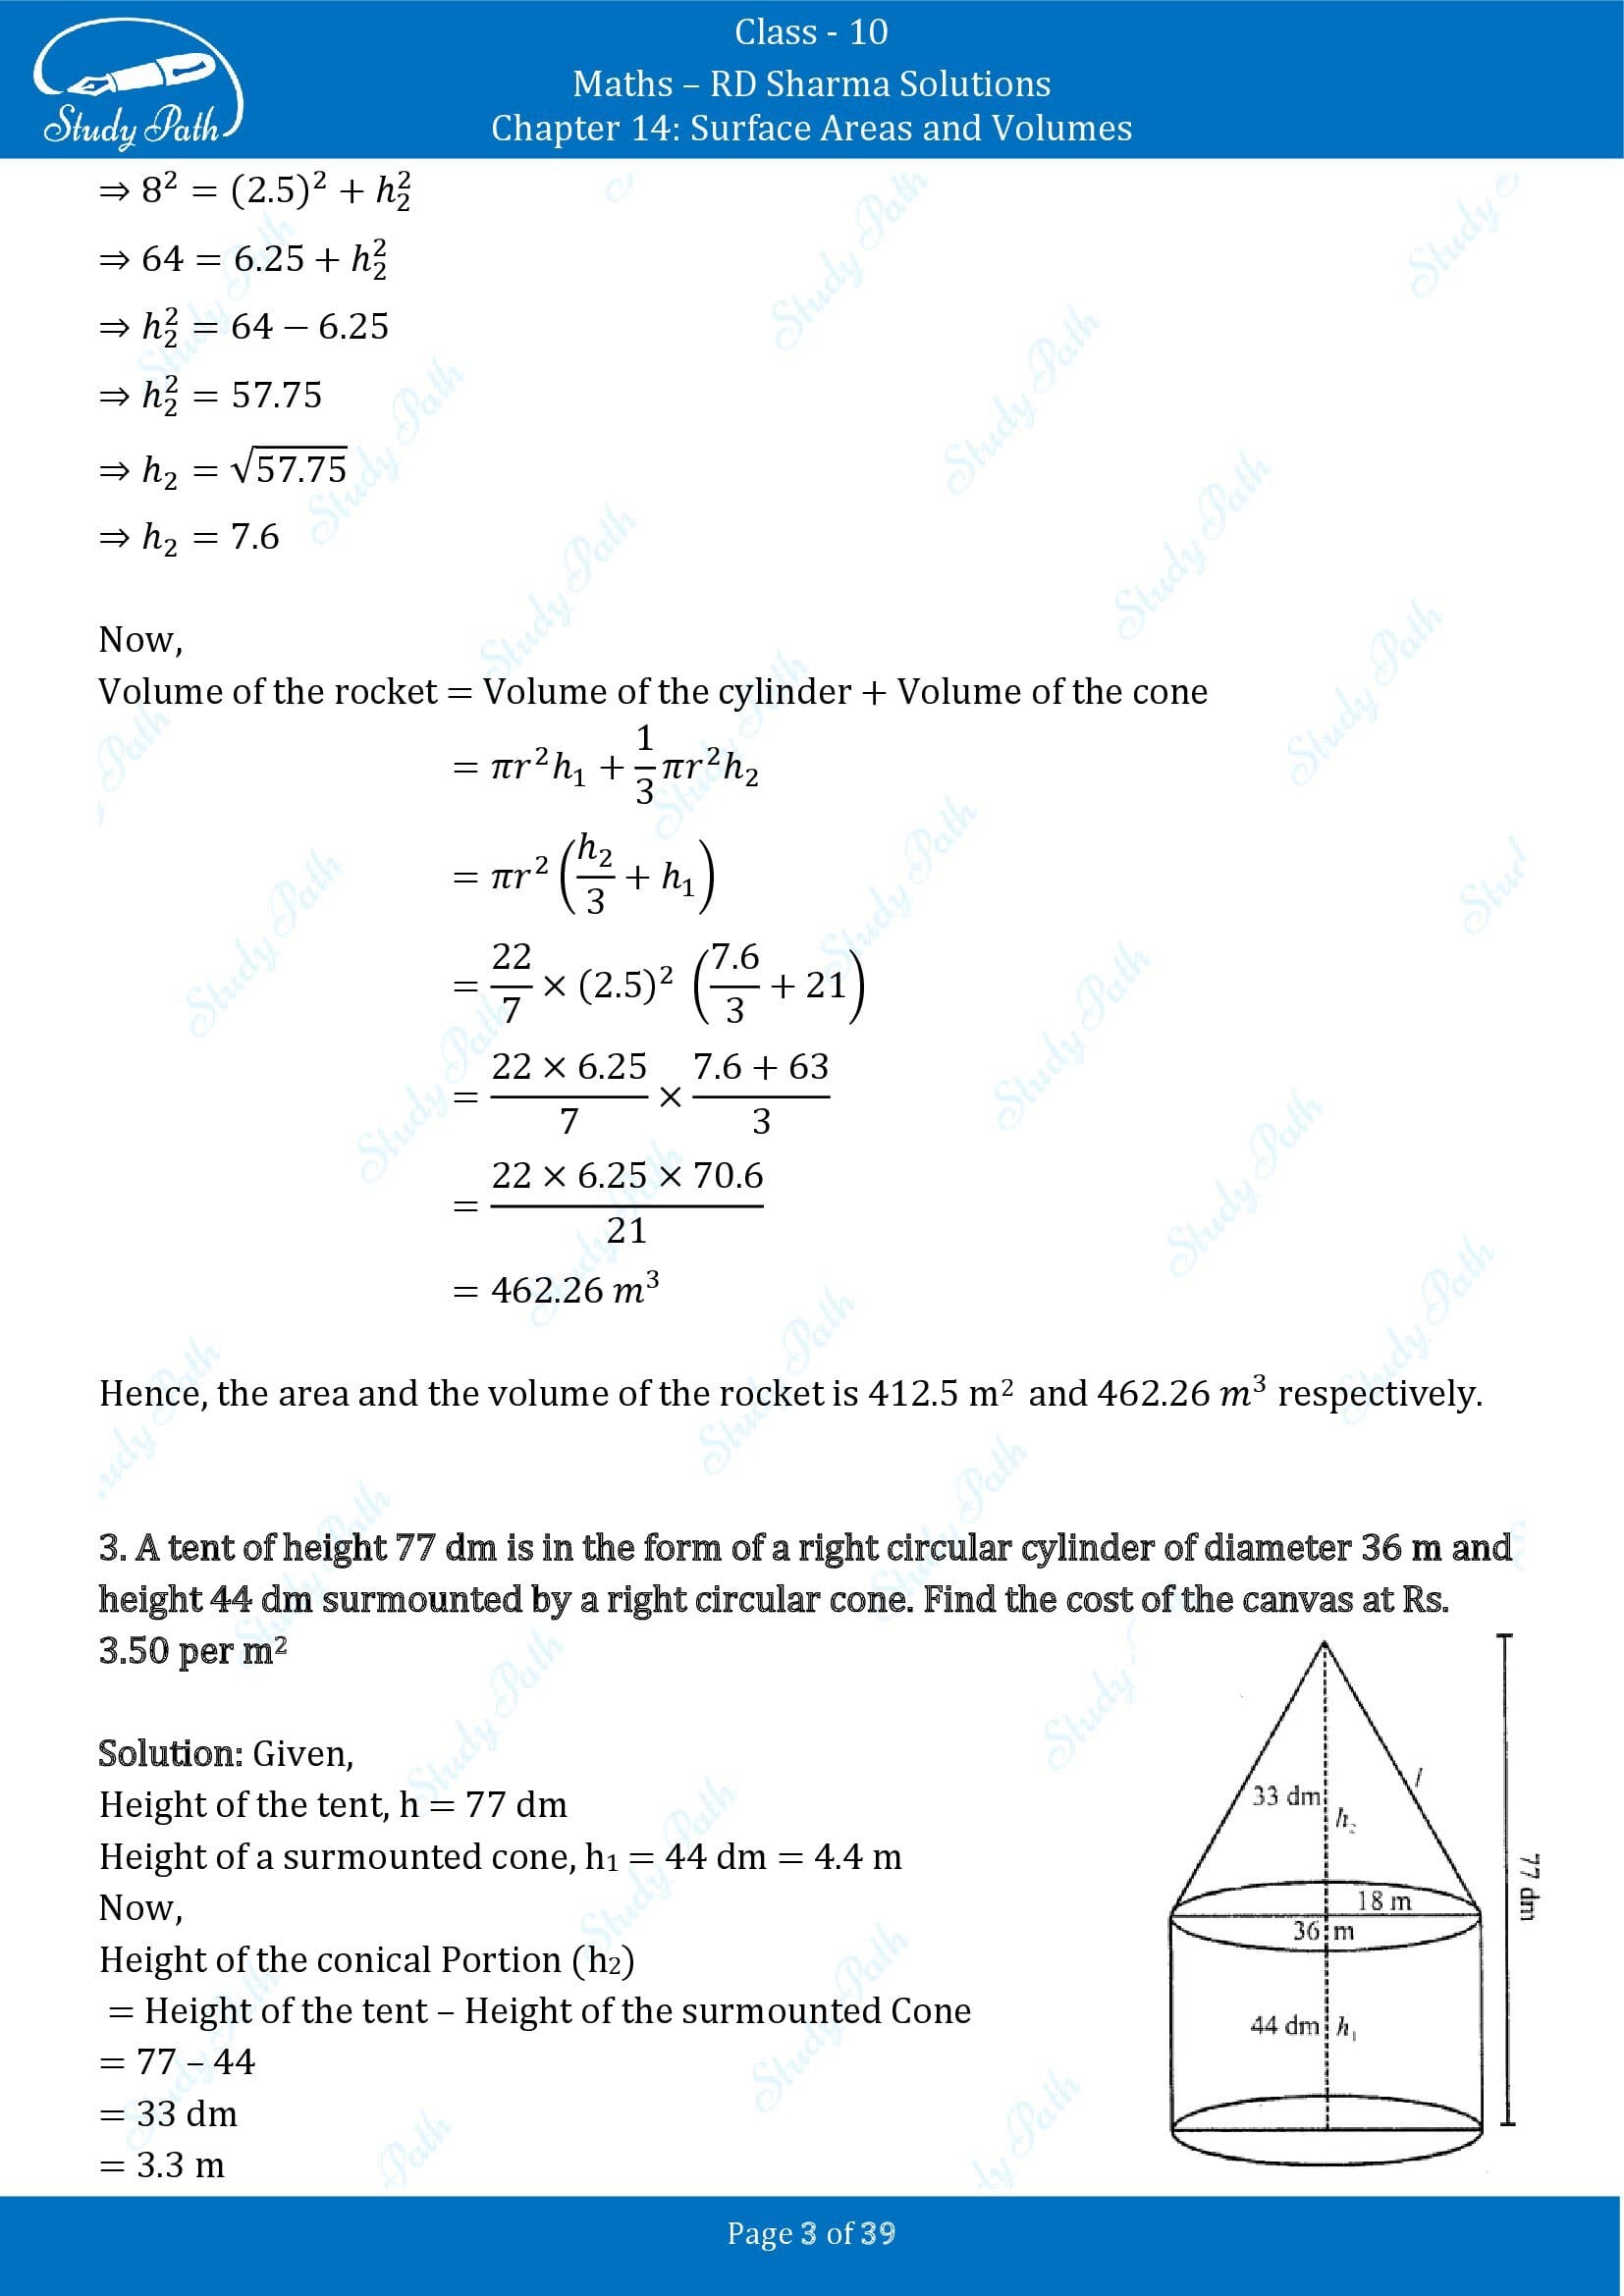 RD Sharma Solutions Class 10 Chapter 14 Surface Areas and Volumes Exercise 14.2 00003